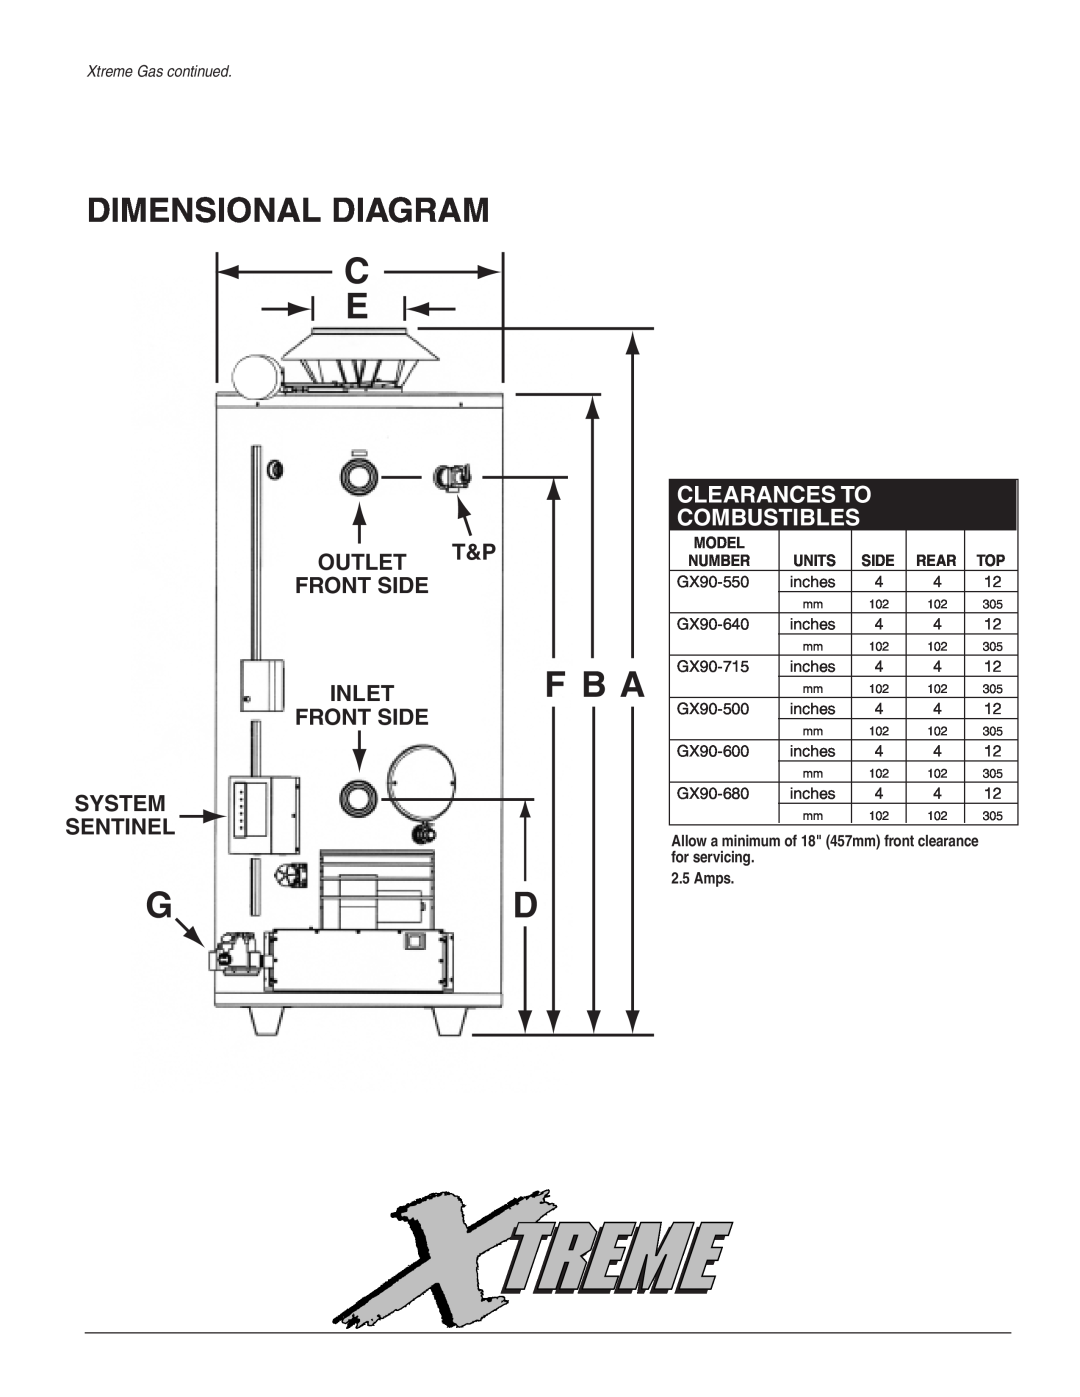 Rheem GX90-550 manual F B A, Dimensional Diagram, Outlet T&P Front Side, Inlet, System Sentinel, Clearances To Combustibles 